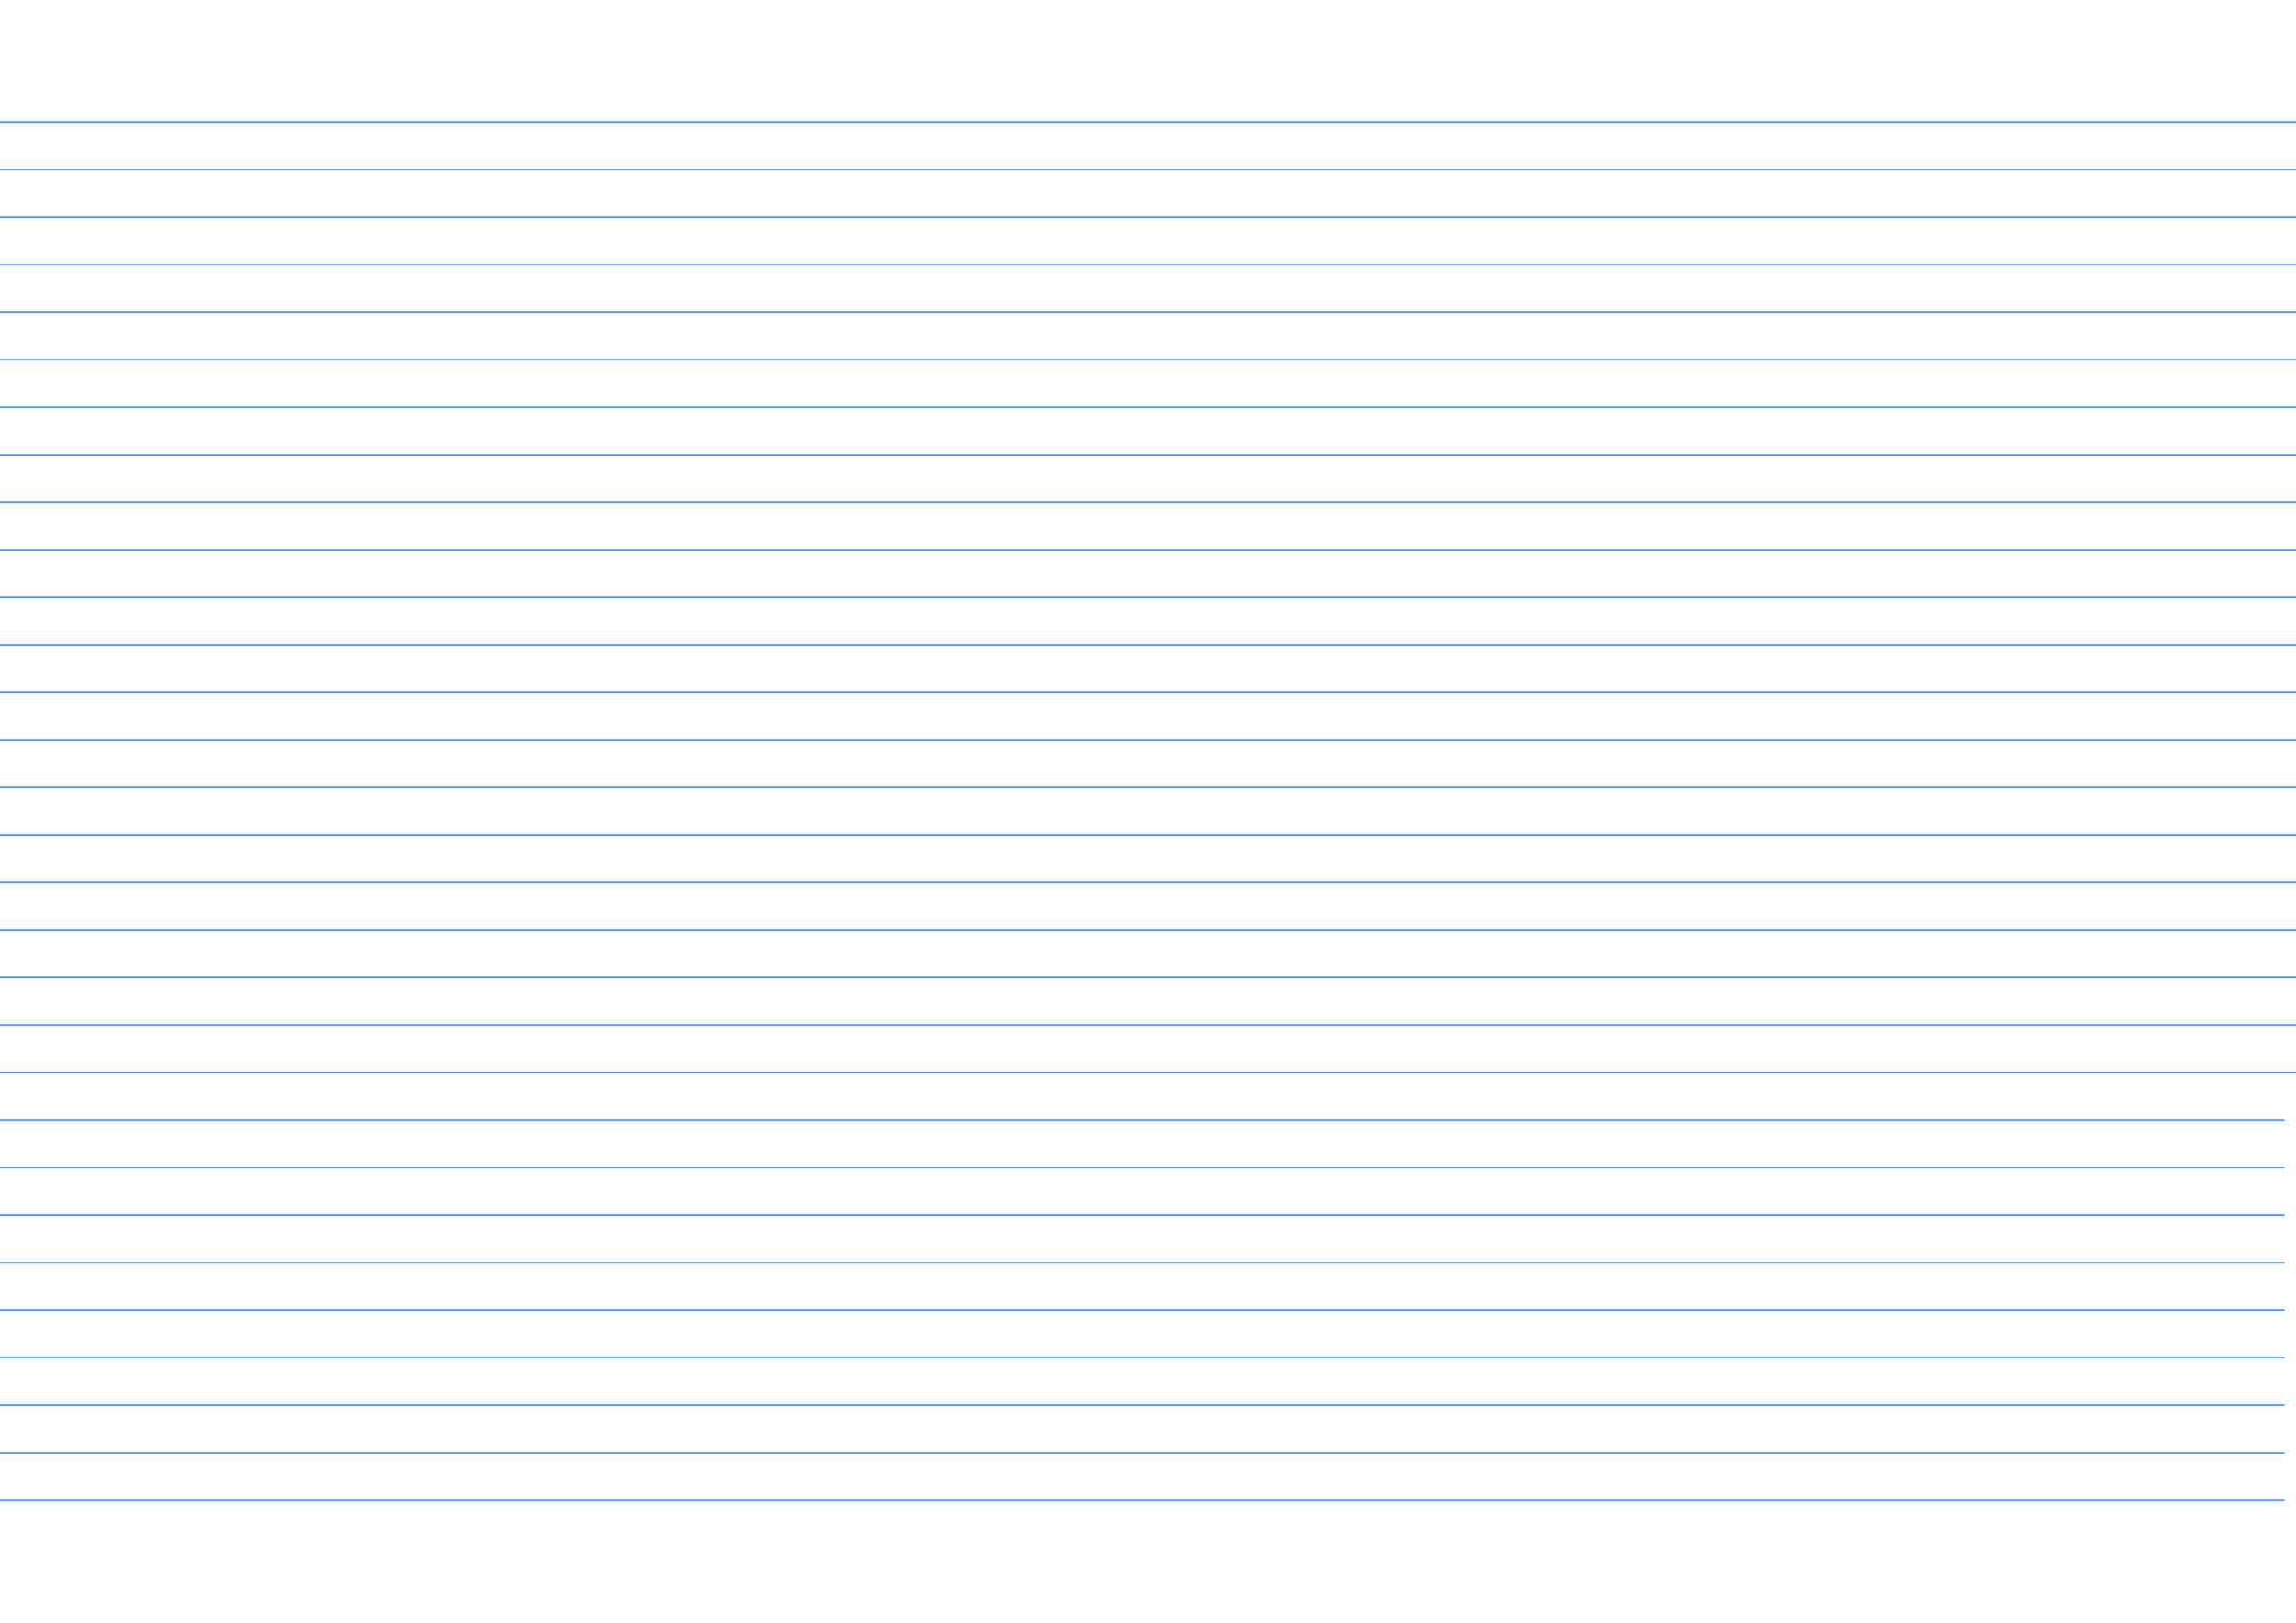 Notebook Paper Template For Word – Calep.midnightpig.co In Notebook Paper Template For Word 2010